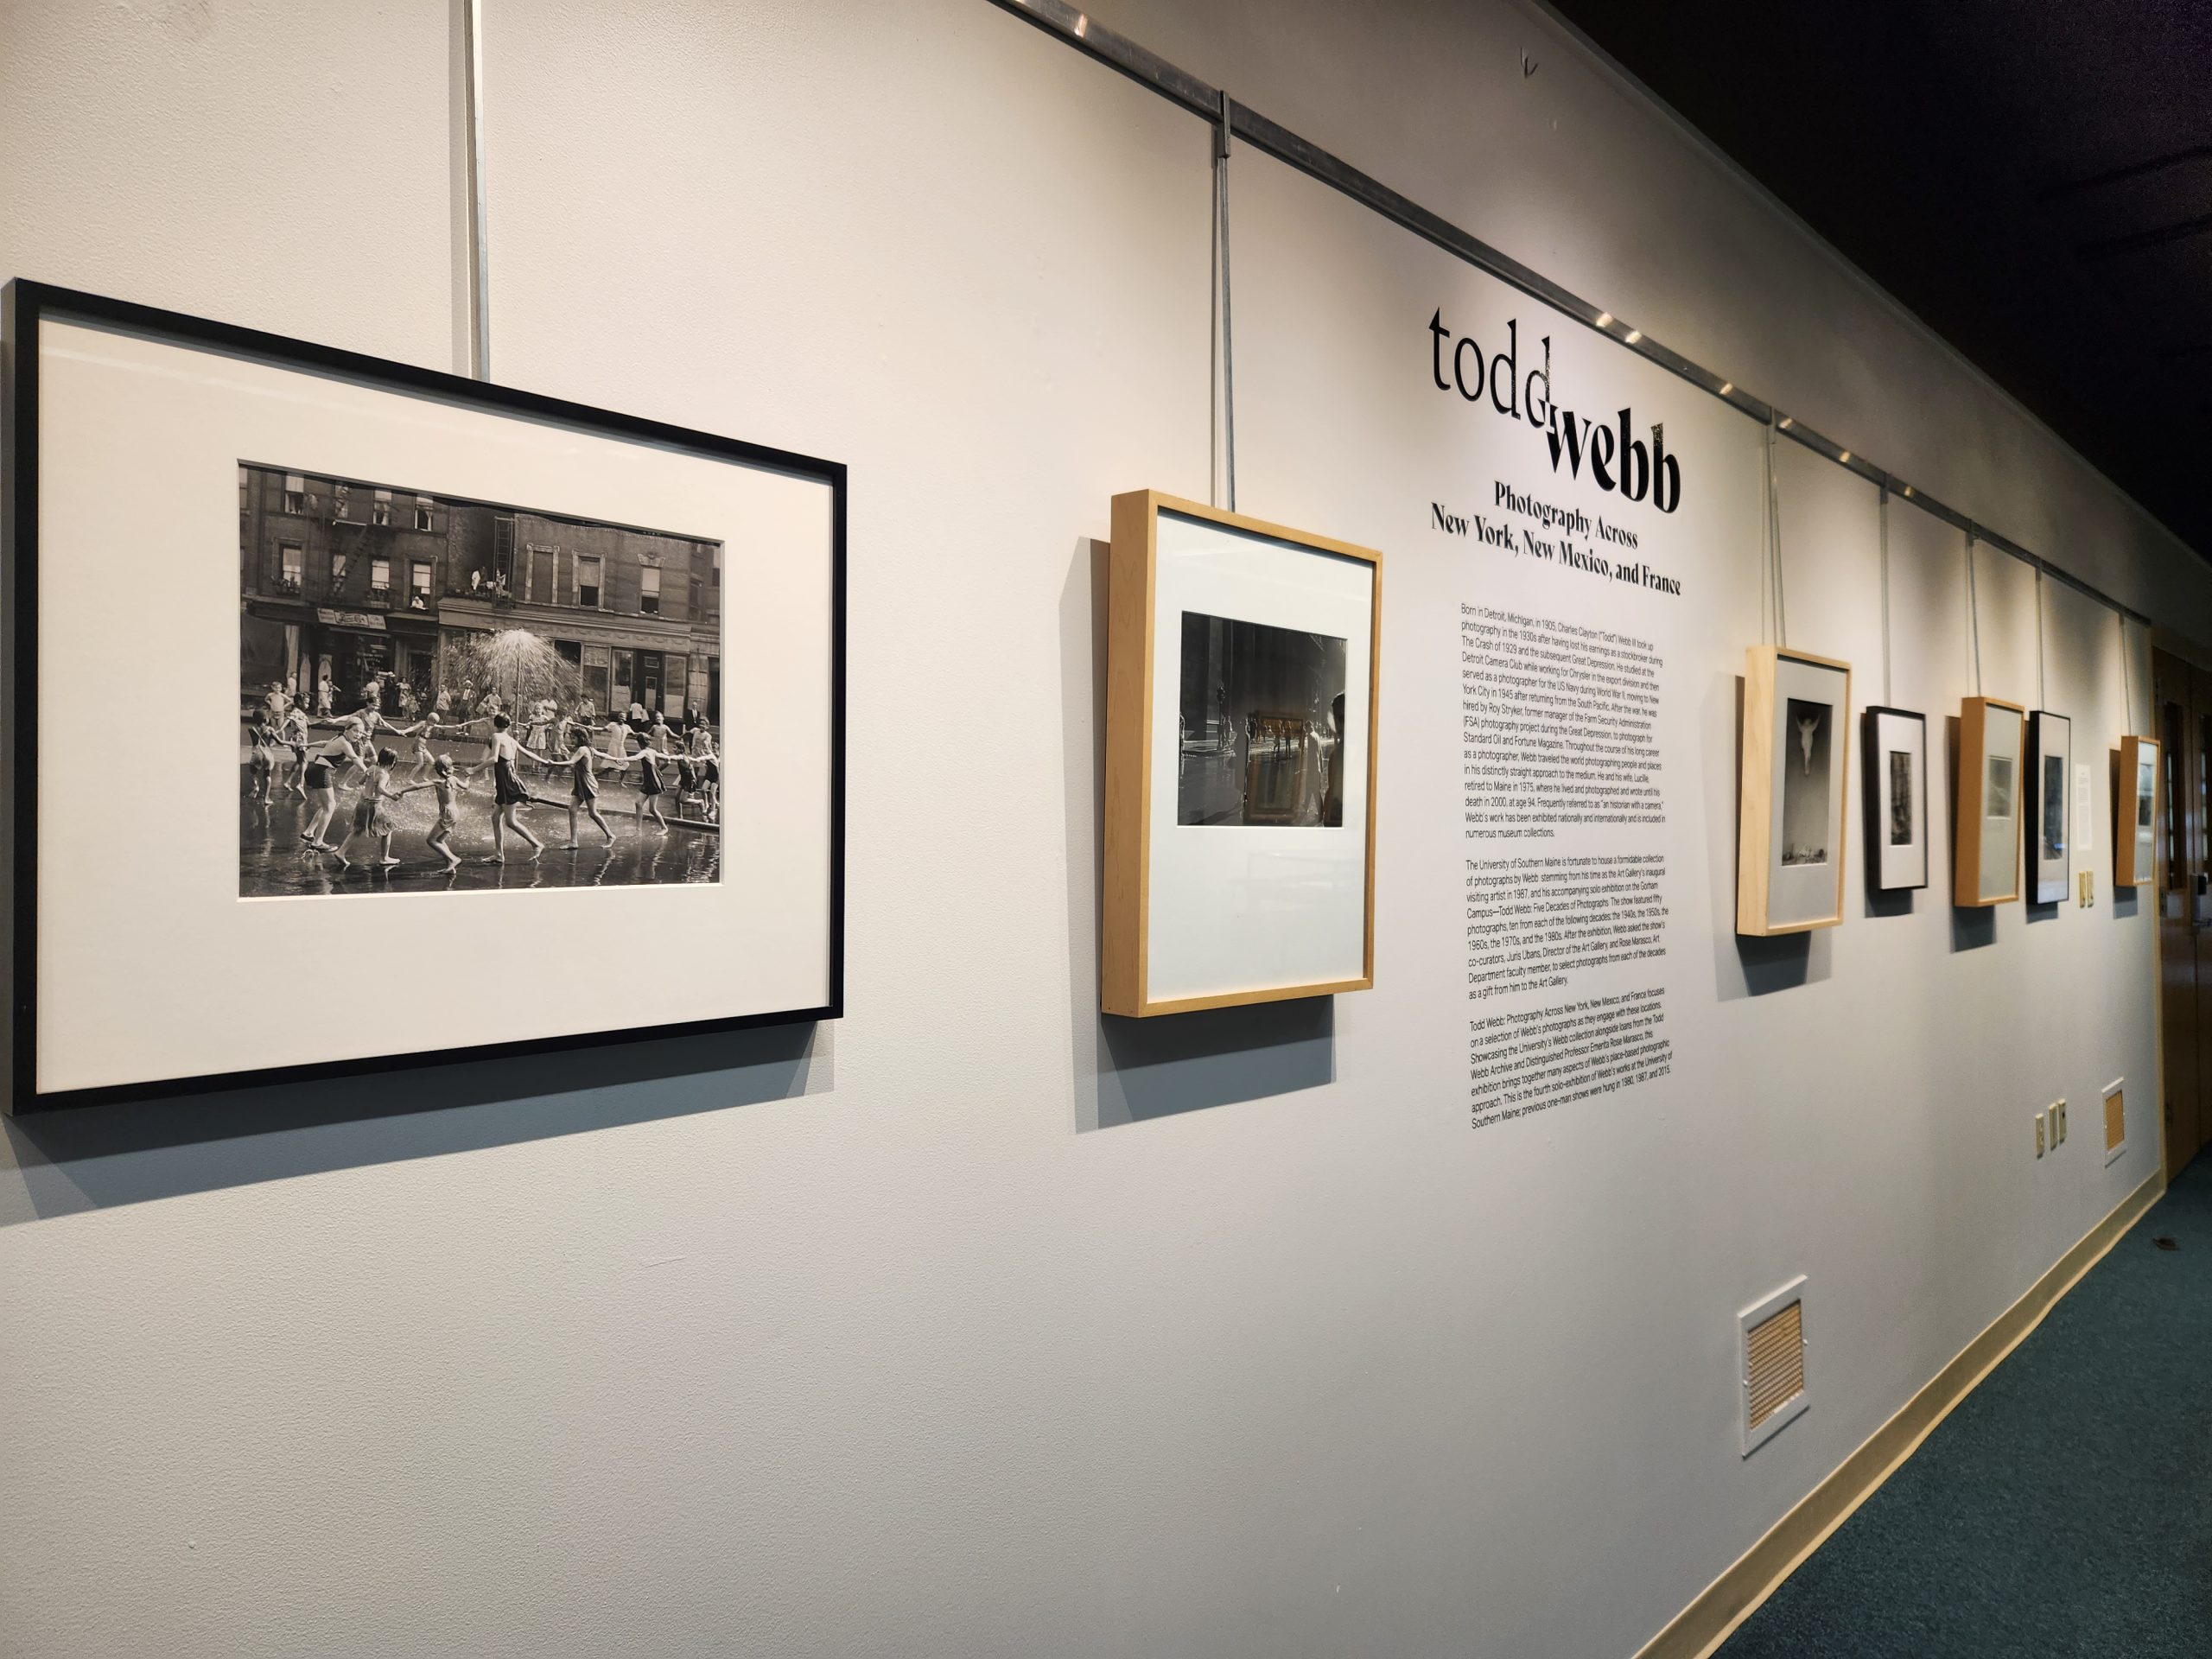 Foreground Left: ""The Circle", LaSalle at Amsterdam, New York," 1946. Silver Gelatin Print. 18 x 22 in. Todd Webb Archive. Installation view, "Todd Webb: Photography Across New York, New Mexico, and France." University of Southern Maine Glickman Library, 2023.